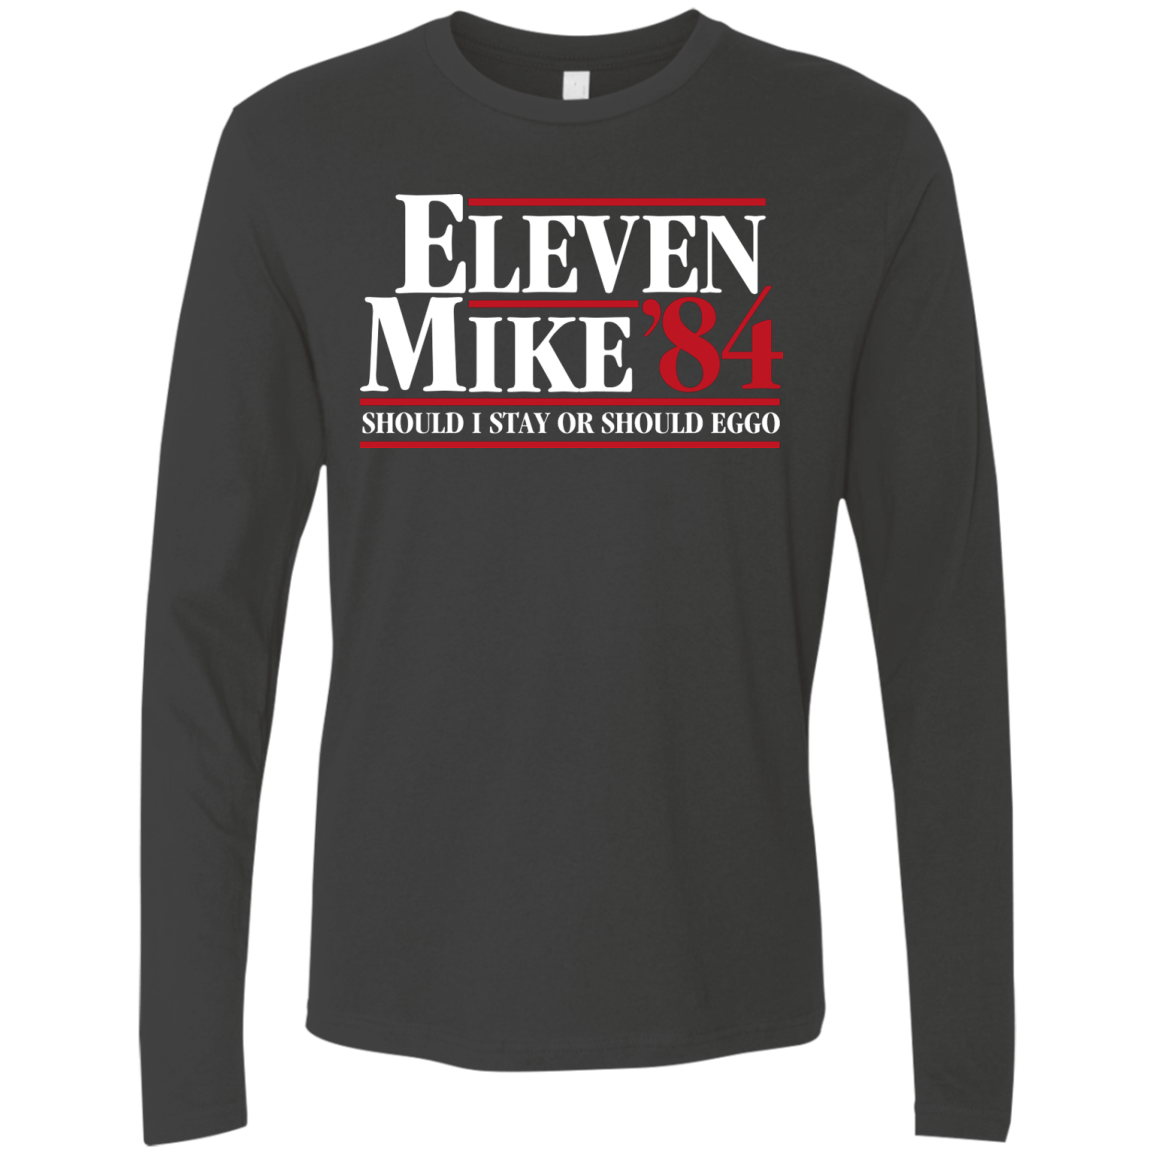 T-Shirts Heavy Metal / Small Eleven Mike 84 - Should I Stay or Should Eggo Men's Premium Long Sleeve